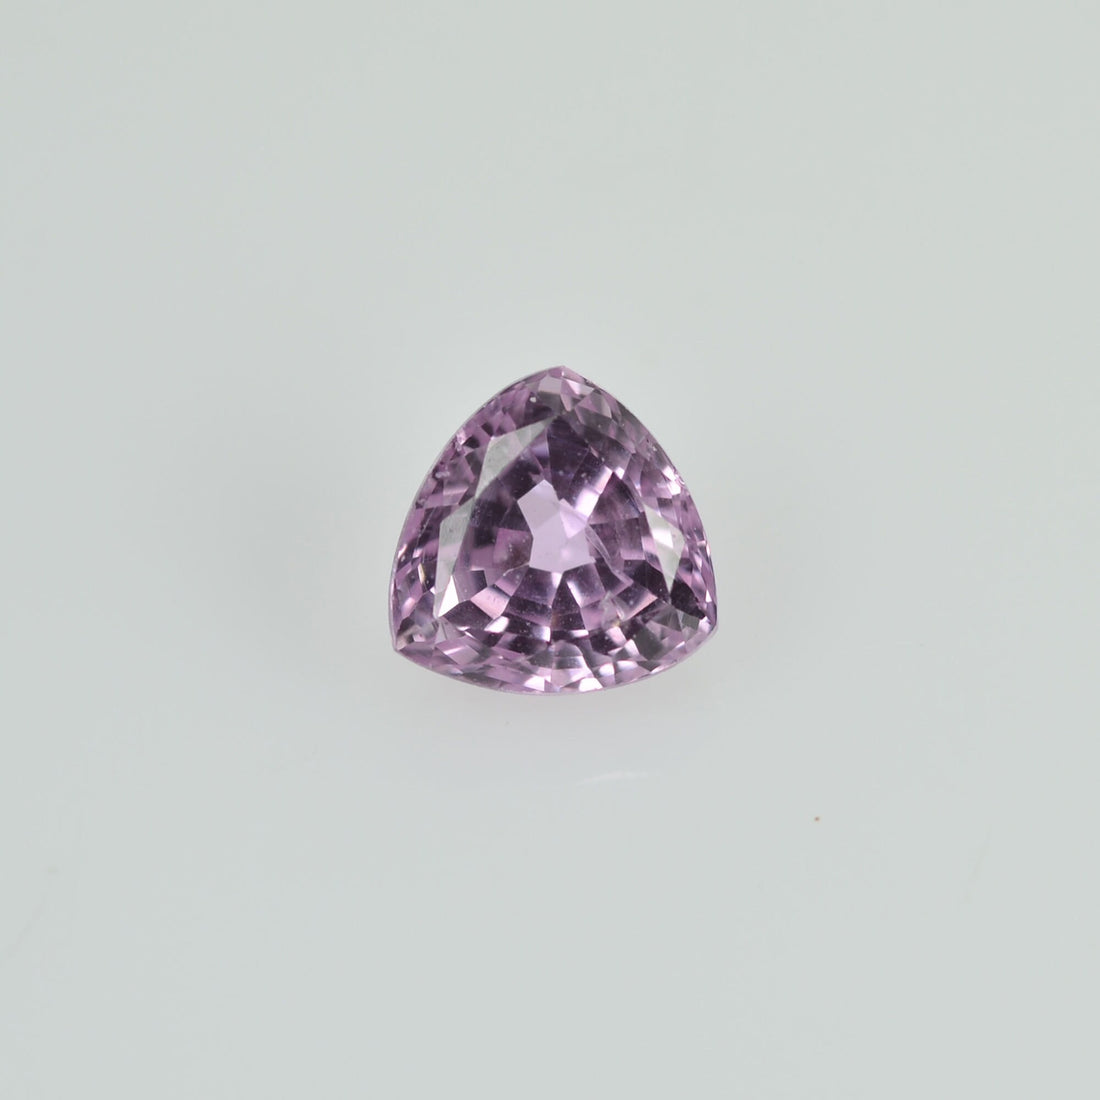 0.36 cts Natural Pink Sapphire Loose Gemstone Trillion Cut